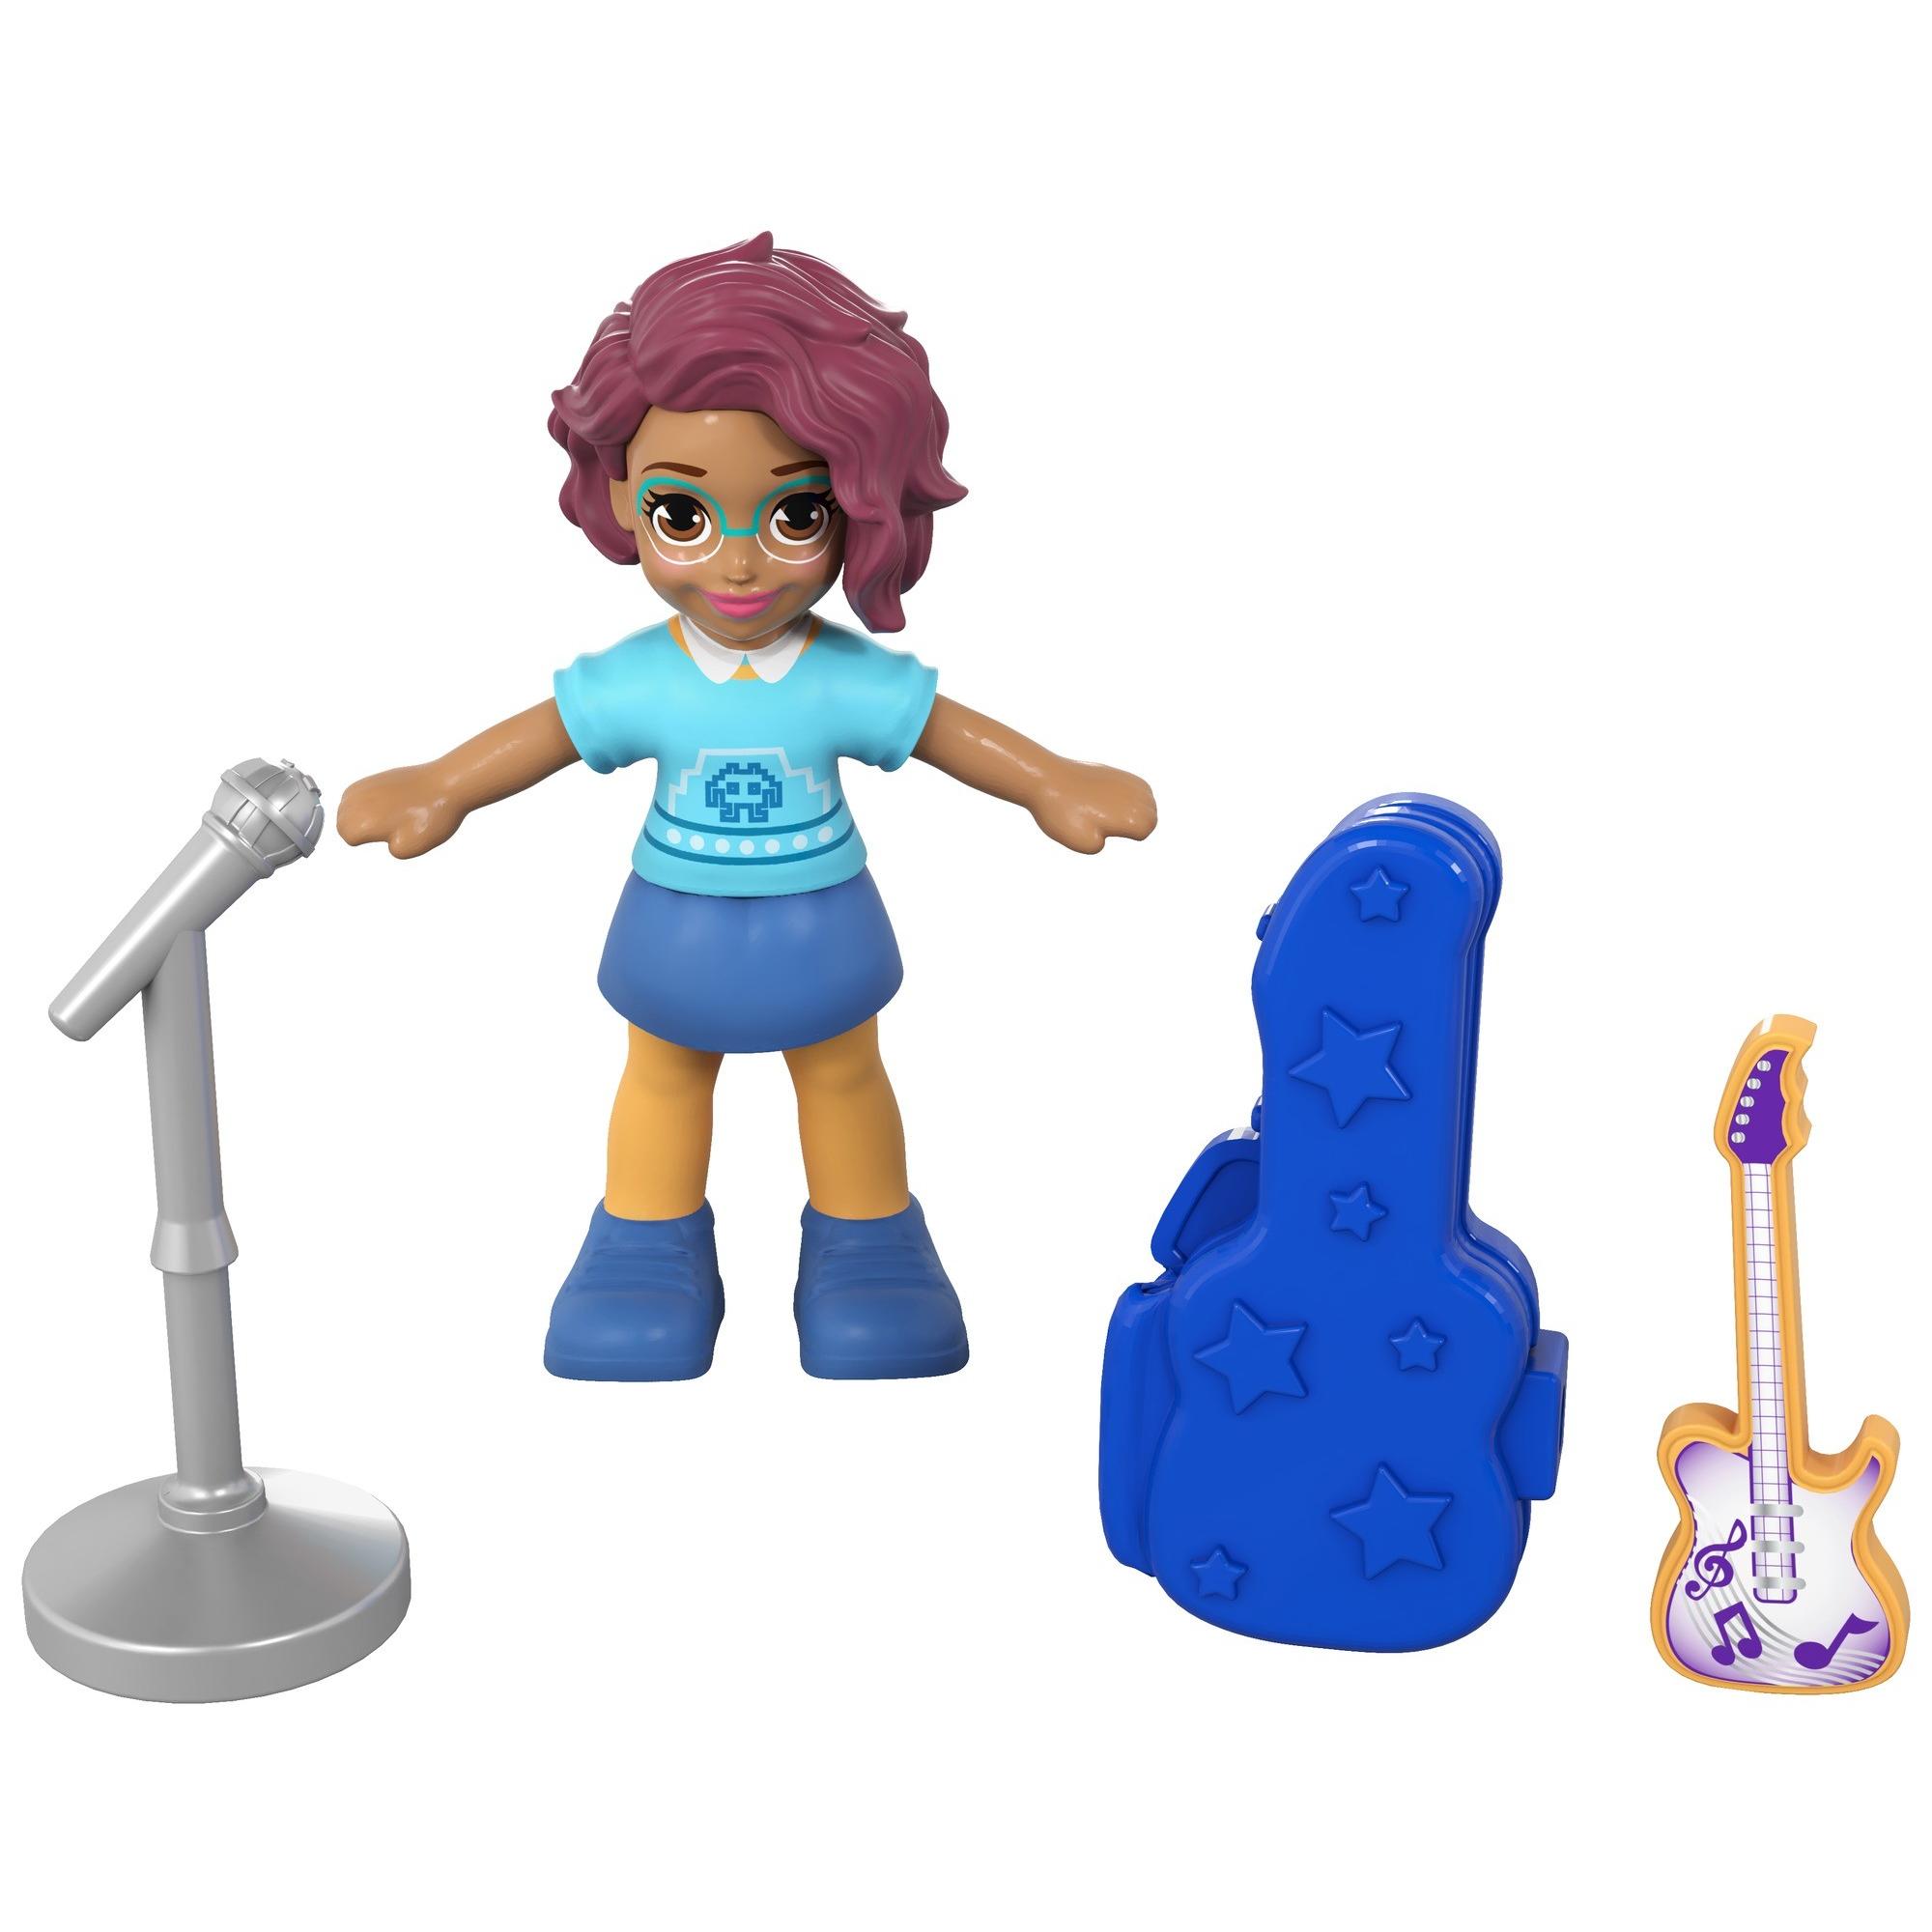 Polly Pocket Tiny Pocket Places Teeny Boppin' Concert Music Compact with Doll - image 4 of 7